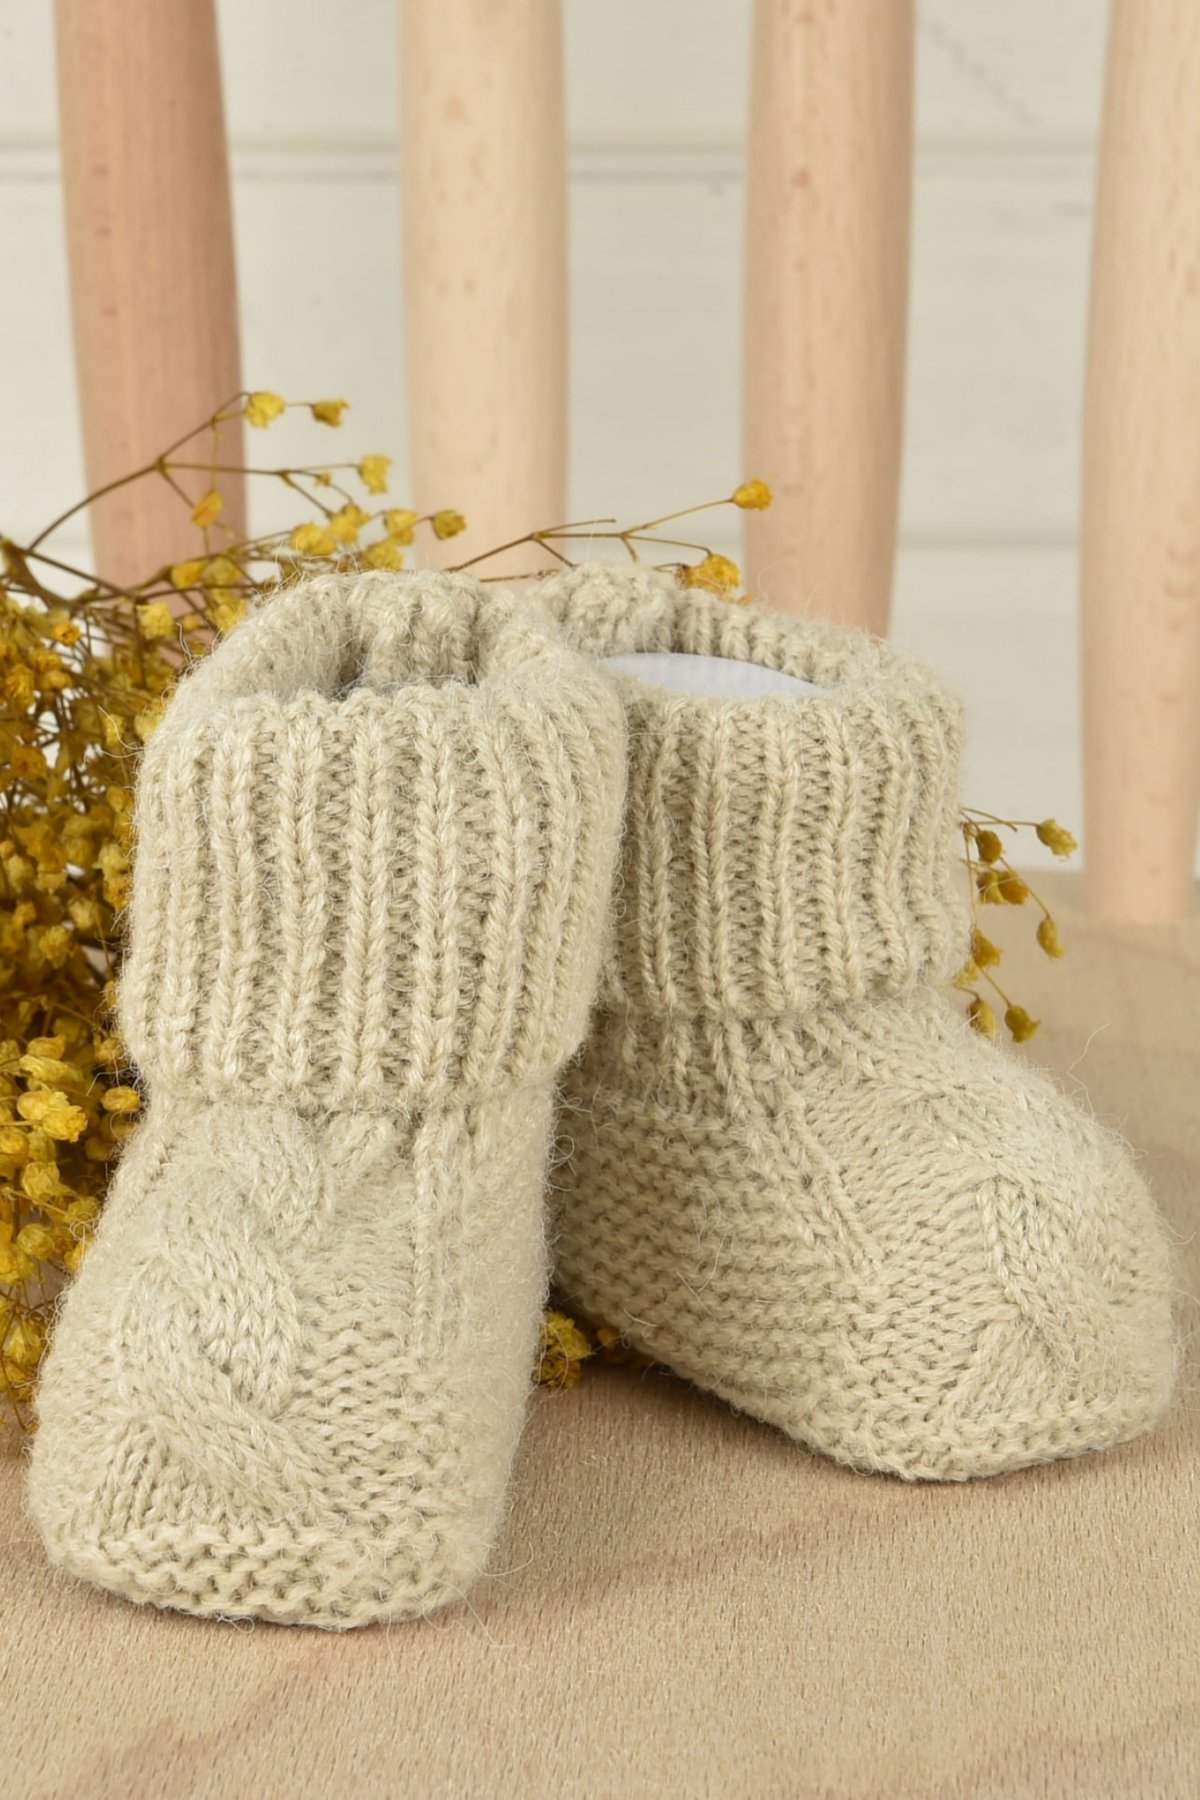 Baby Booties-Beige/Bej  3-9 Month   %Soft Acrlyc